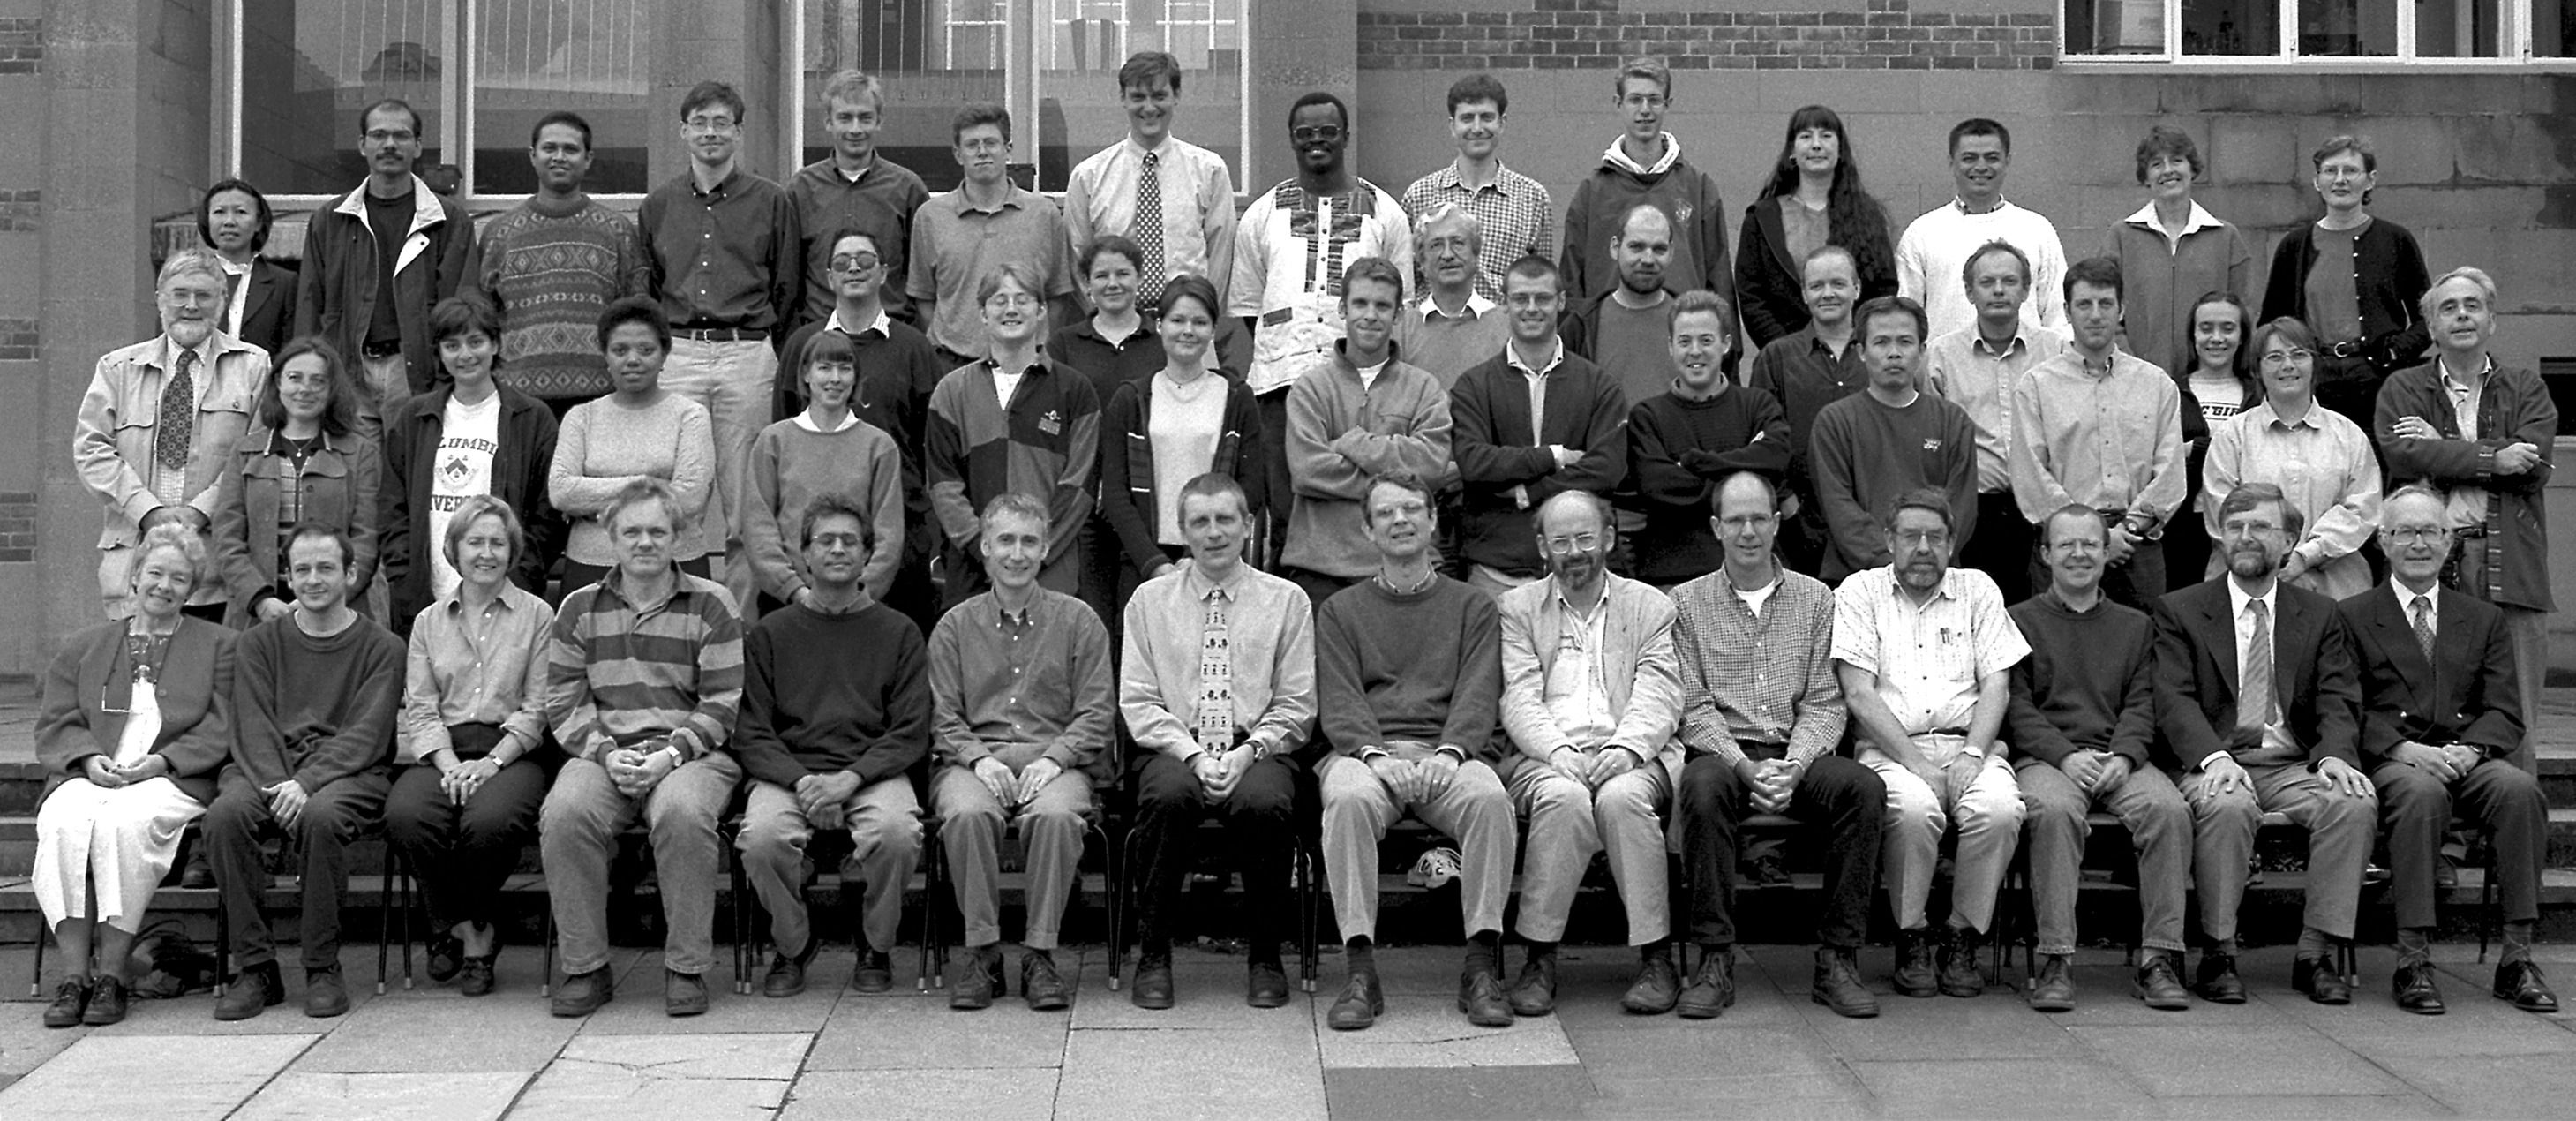 Geography Department Postgraduate Group Photo from 1999